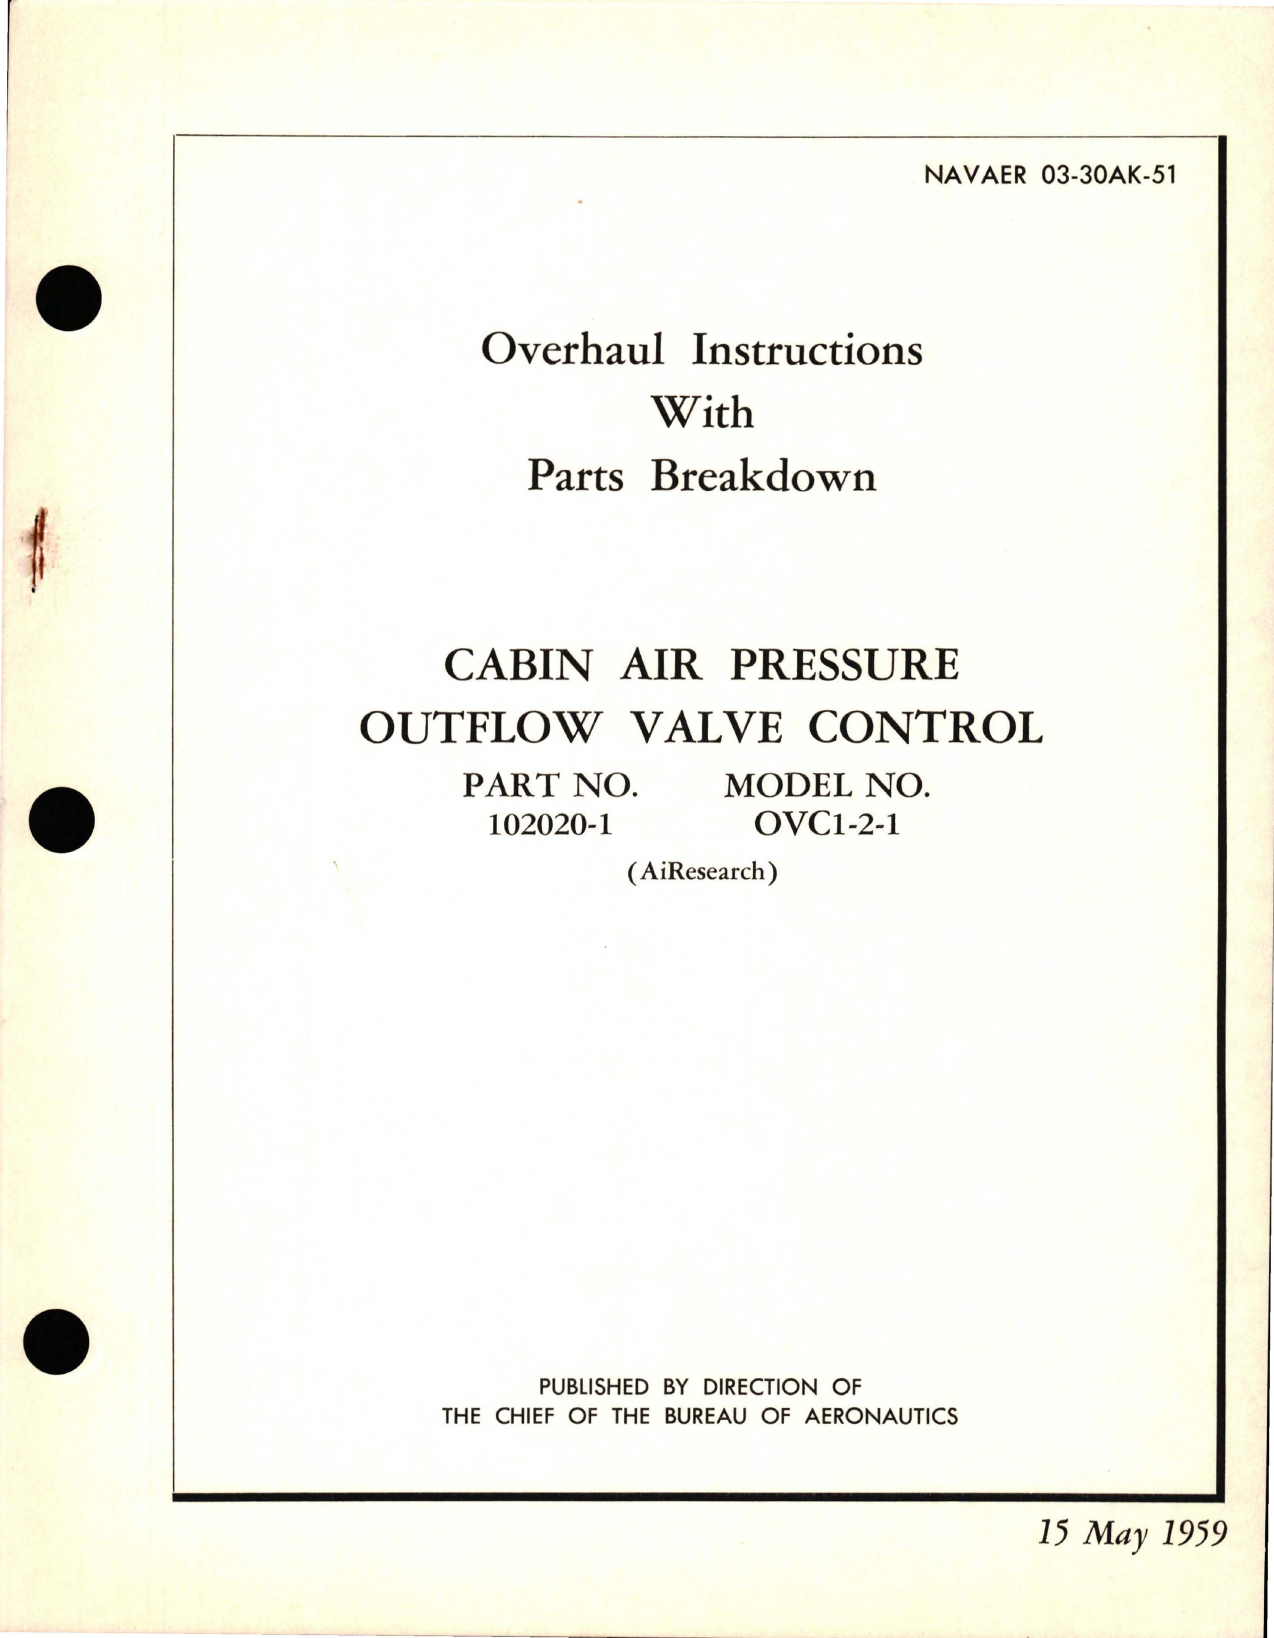 Sample page 1 from AirCorps Library document: Overhaul Instructions with Parts Breakdown for Cabin Air Pressure Outflow Valve Control - Part 102020-1 - Model OVC1-2-1 